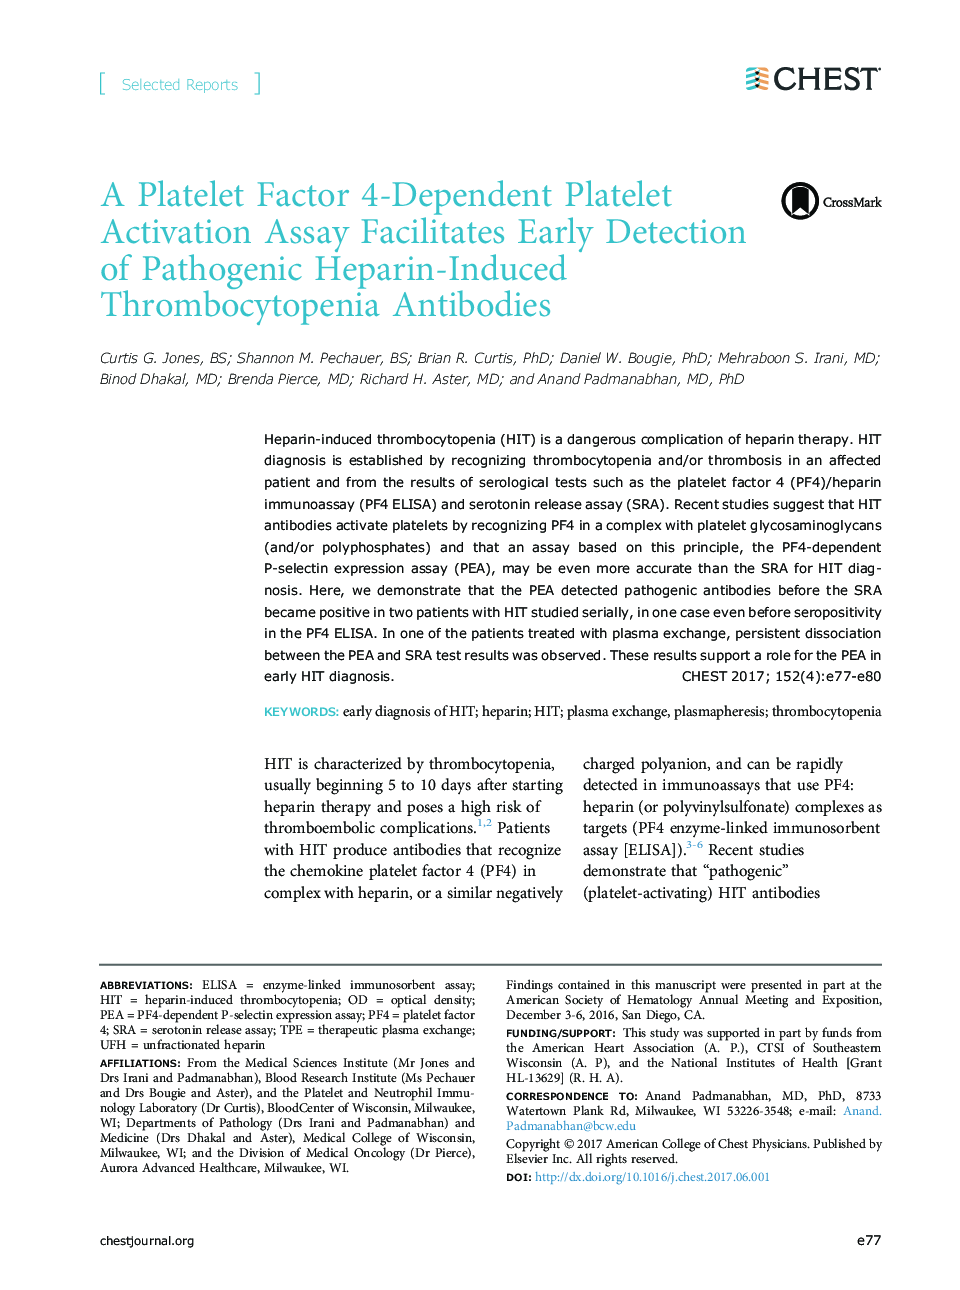 A Platelet Factor 4-Dependent Platelet Activation Assay Facilitates Early Detection of Pathogenic Heparin-Induced Thrombocytopenia Antibodies